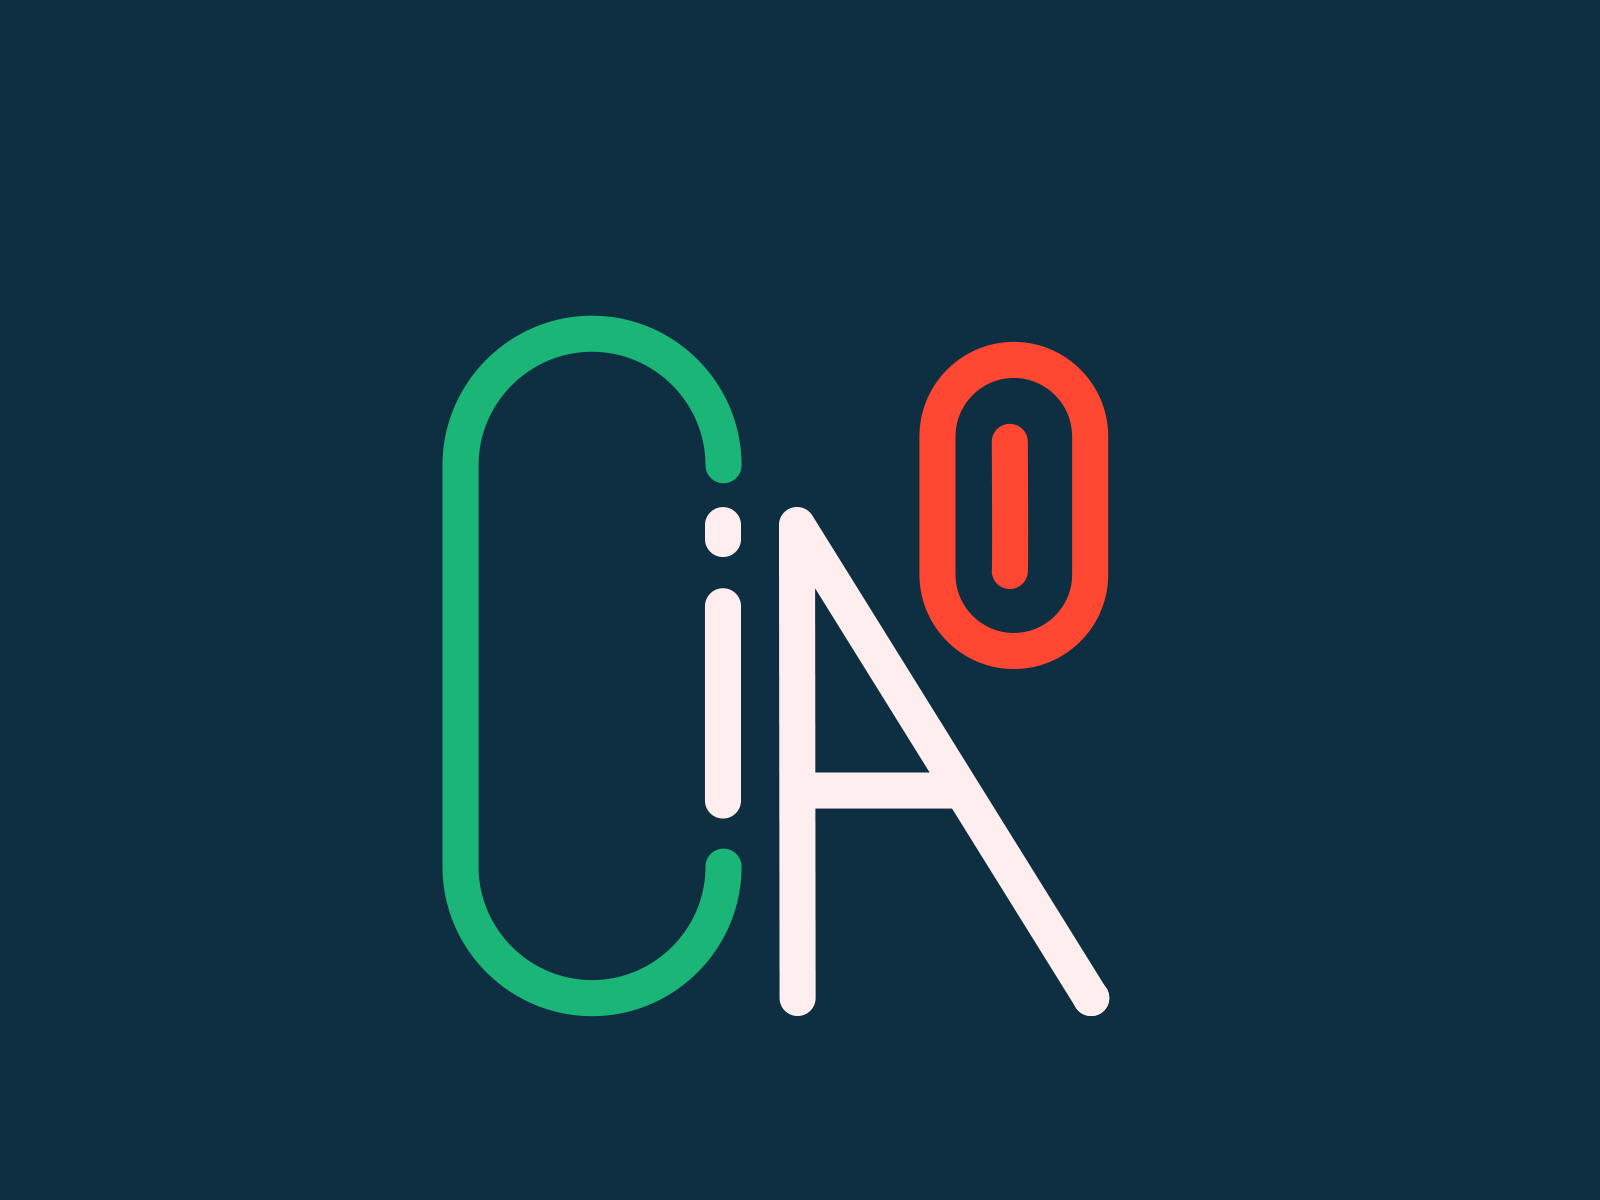 CIAO by Marcos Silva on Dribbble